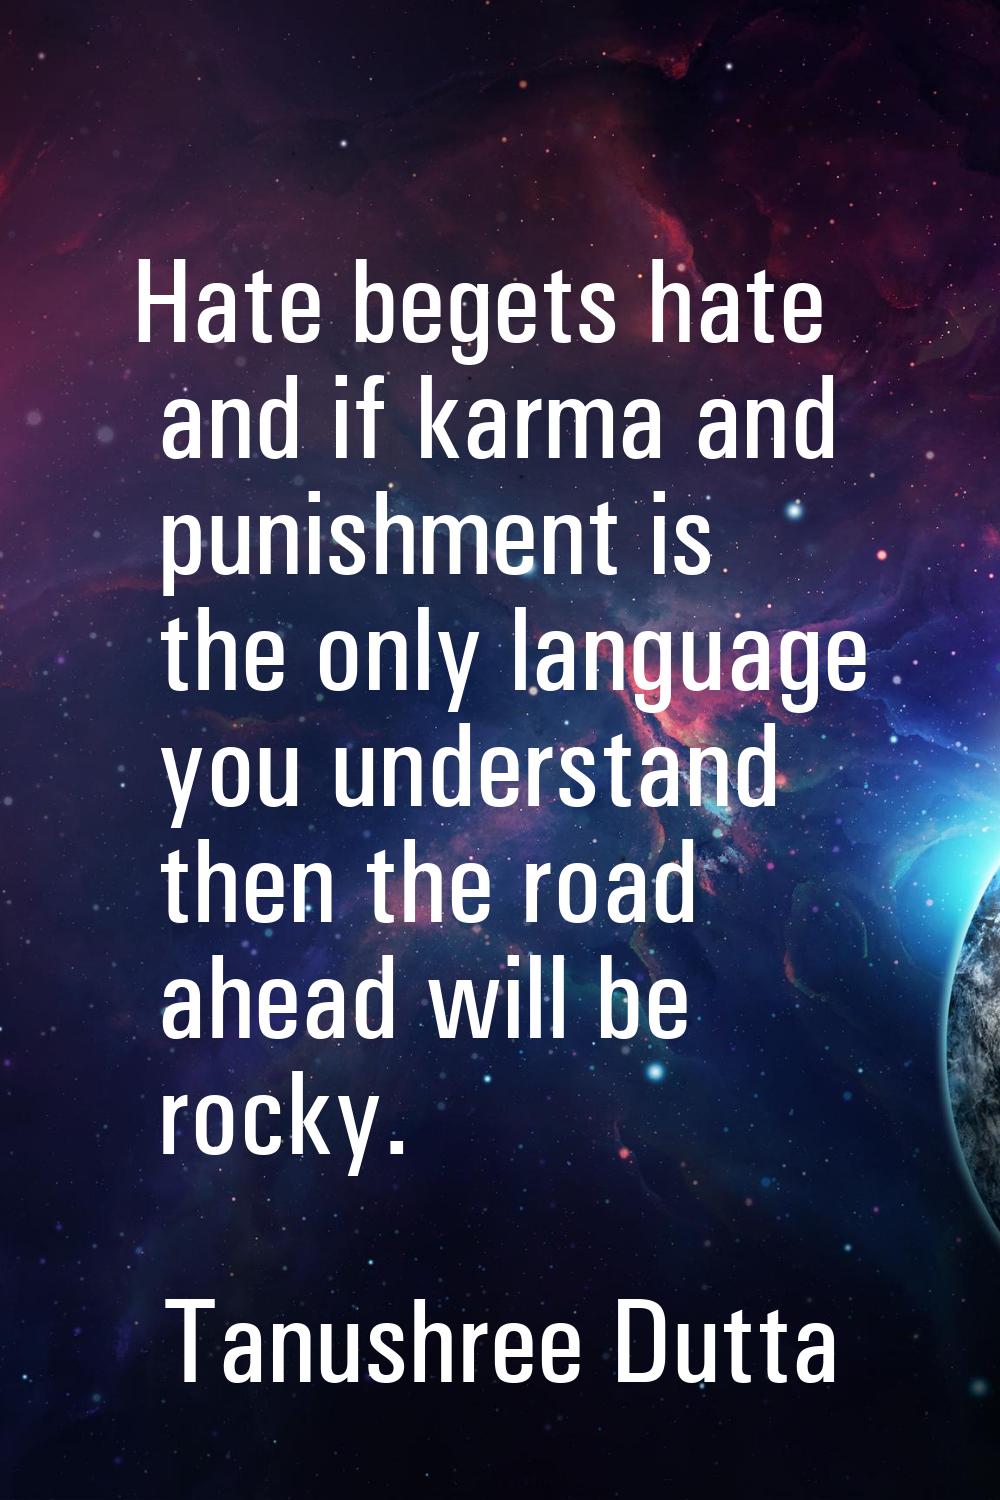 Hate begets hate and if karma and punishment is the only language you understand then the road ahea